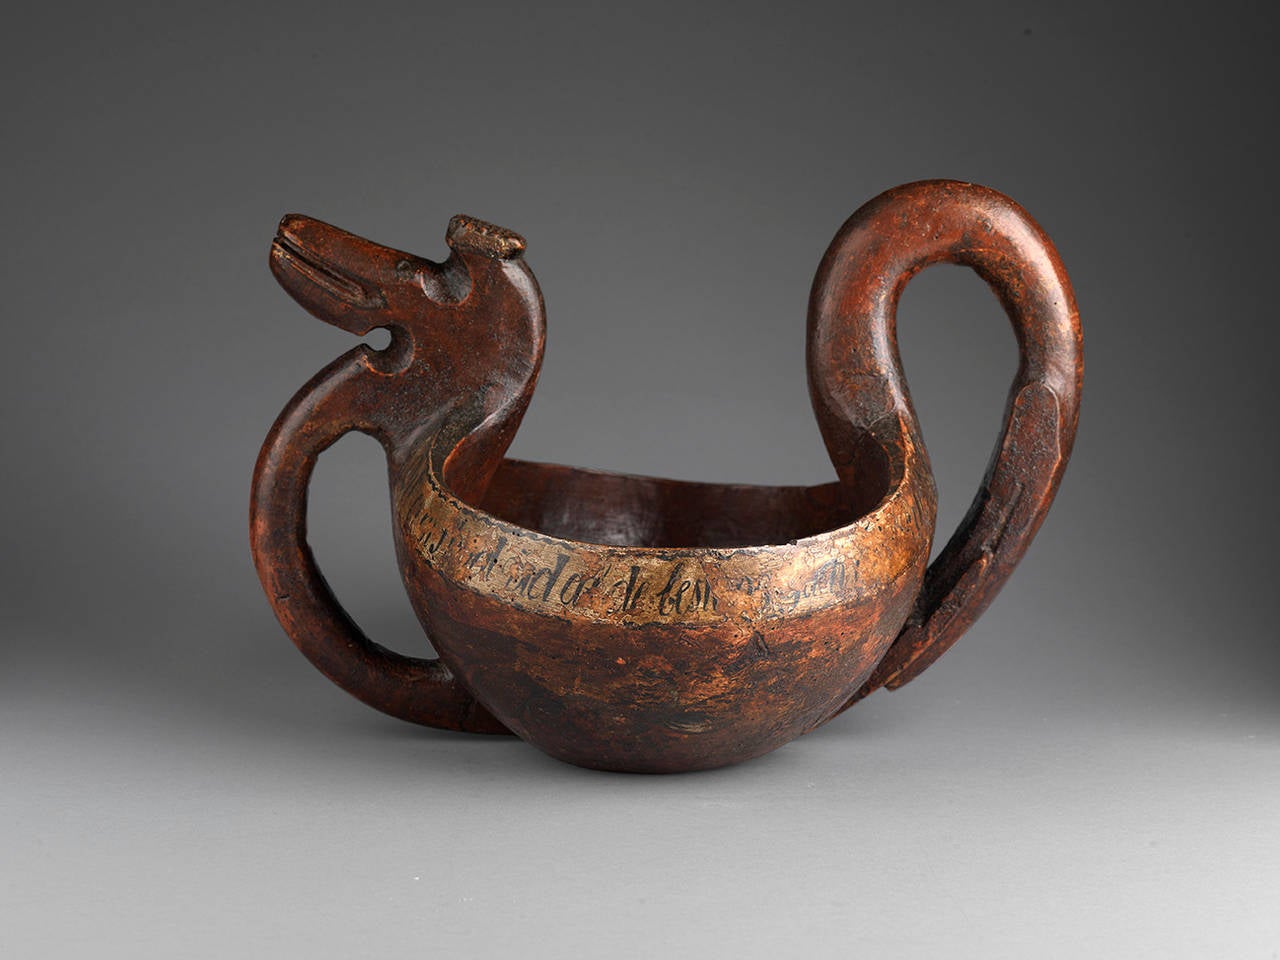 Ceremonial Kasa with stylized dragon’s head and tail incorporating loop handles. 
Hewn and hand-carved birchwood retaining traces of original rosemaling 
with traces of original inscription including the Date “1864.”